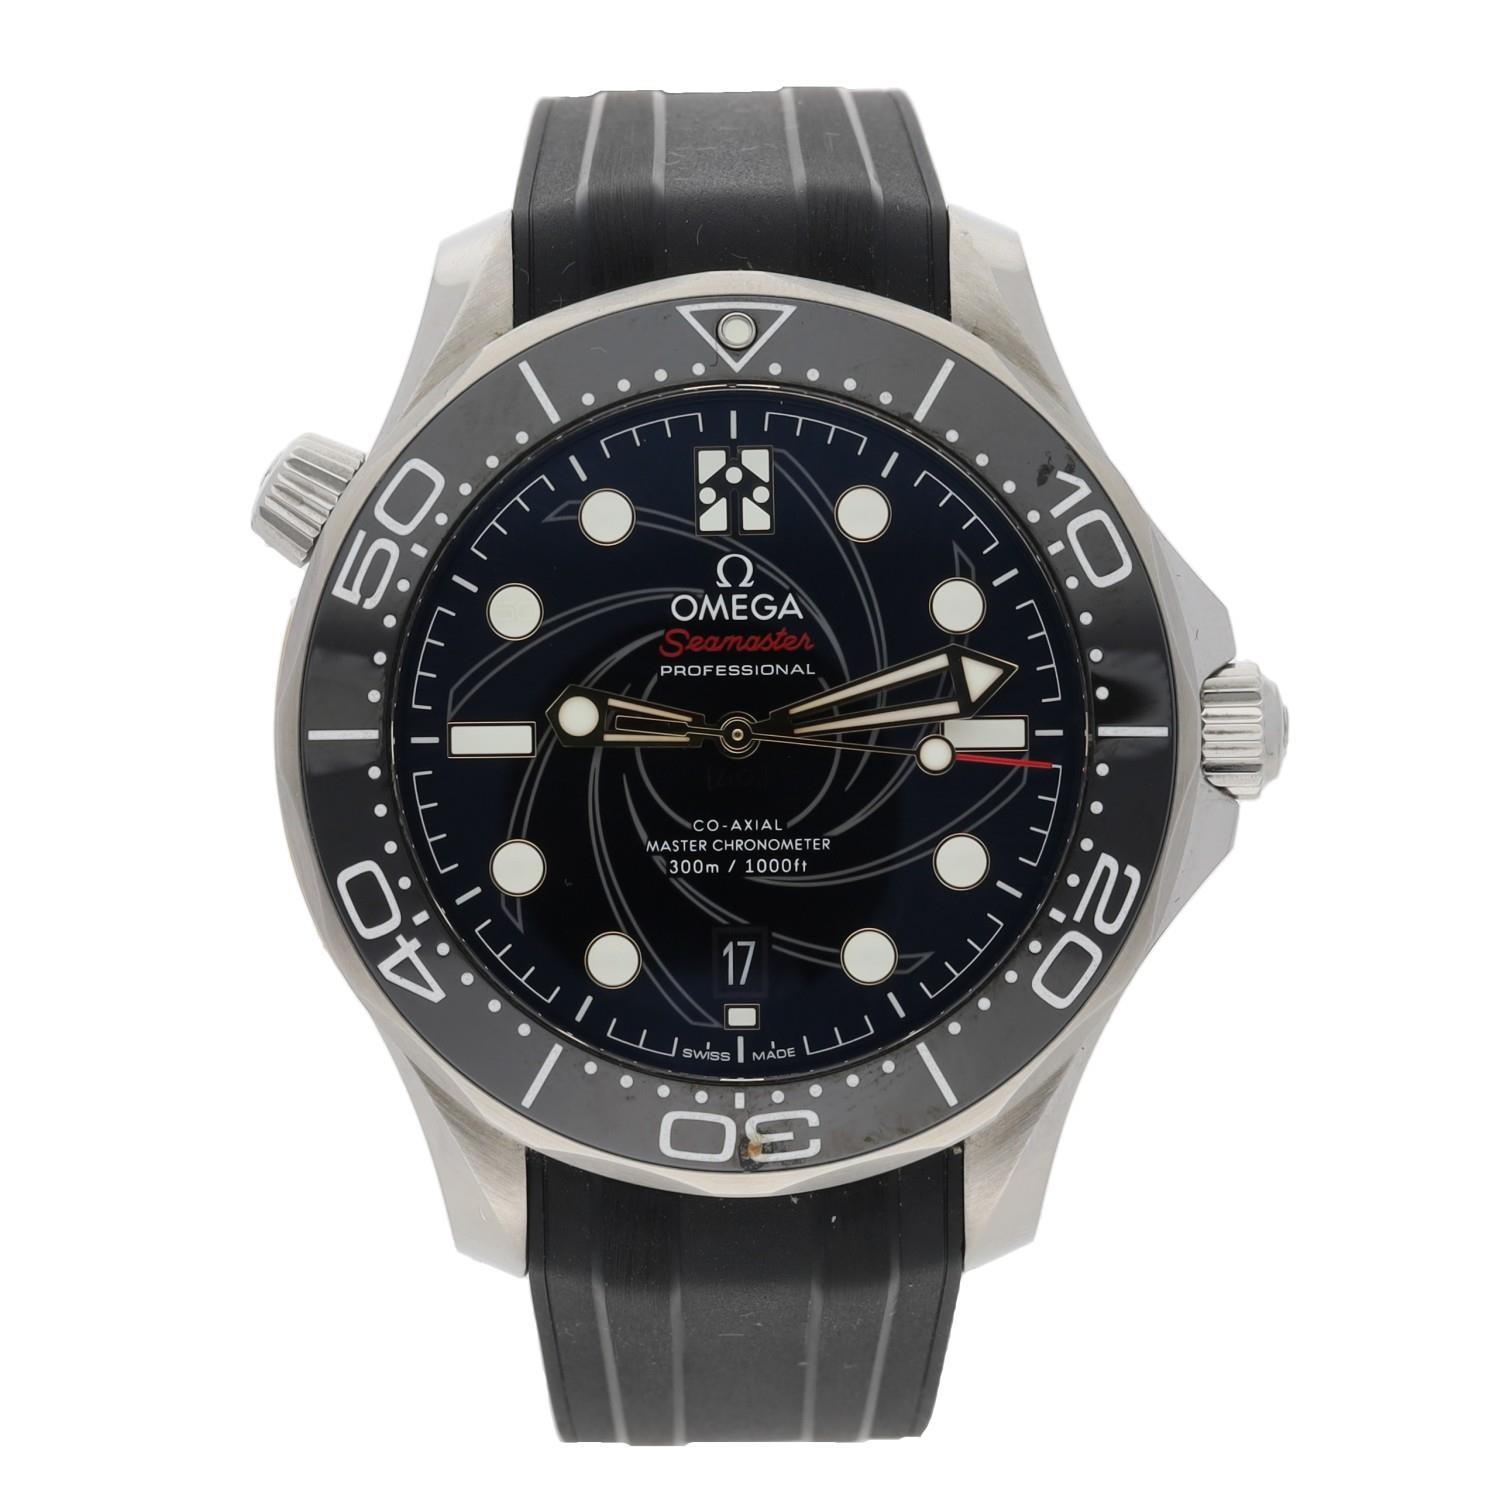 FINE CONDITION - Omega Seamaster Professional 300M 'James Bond' Limited Edition Co-Axial Master - Image 2 of 7